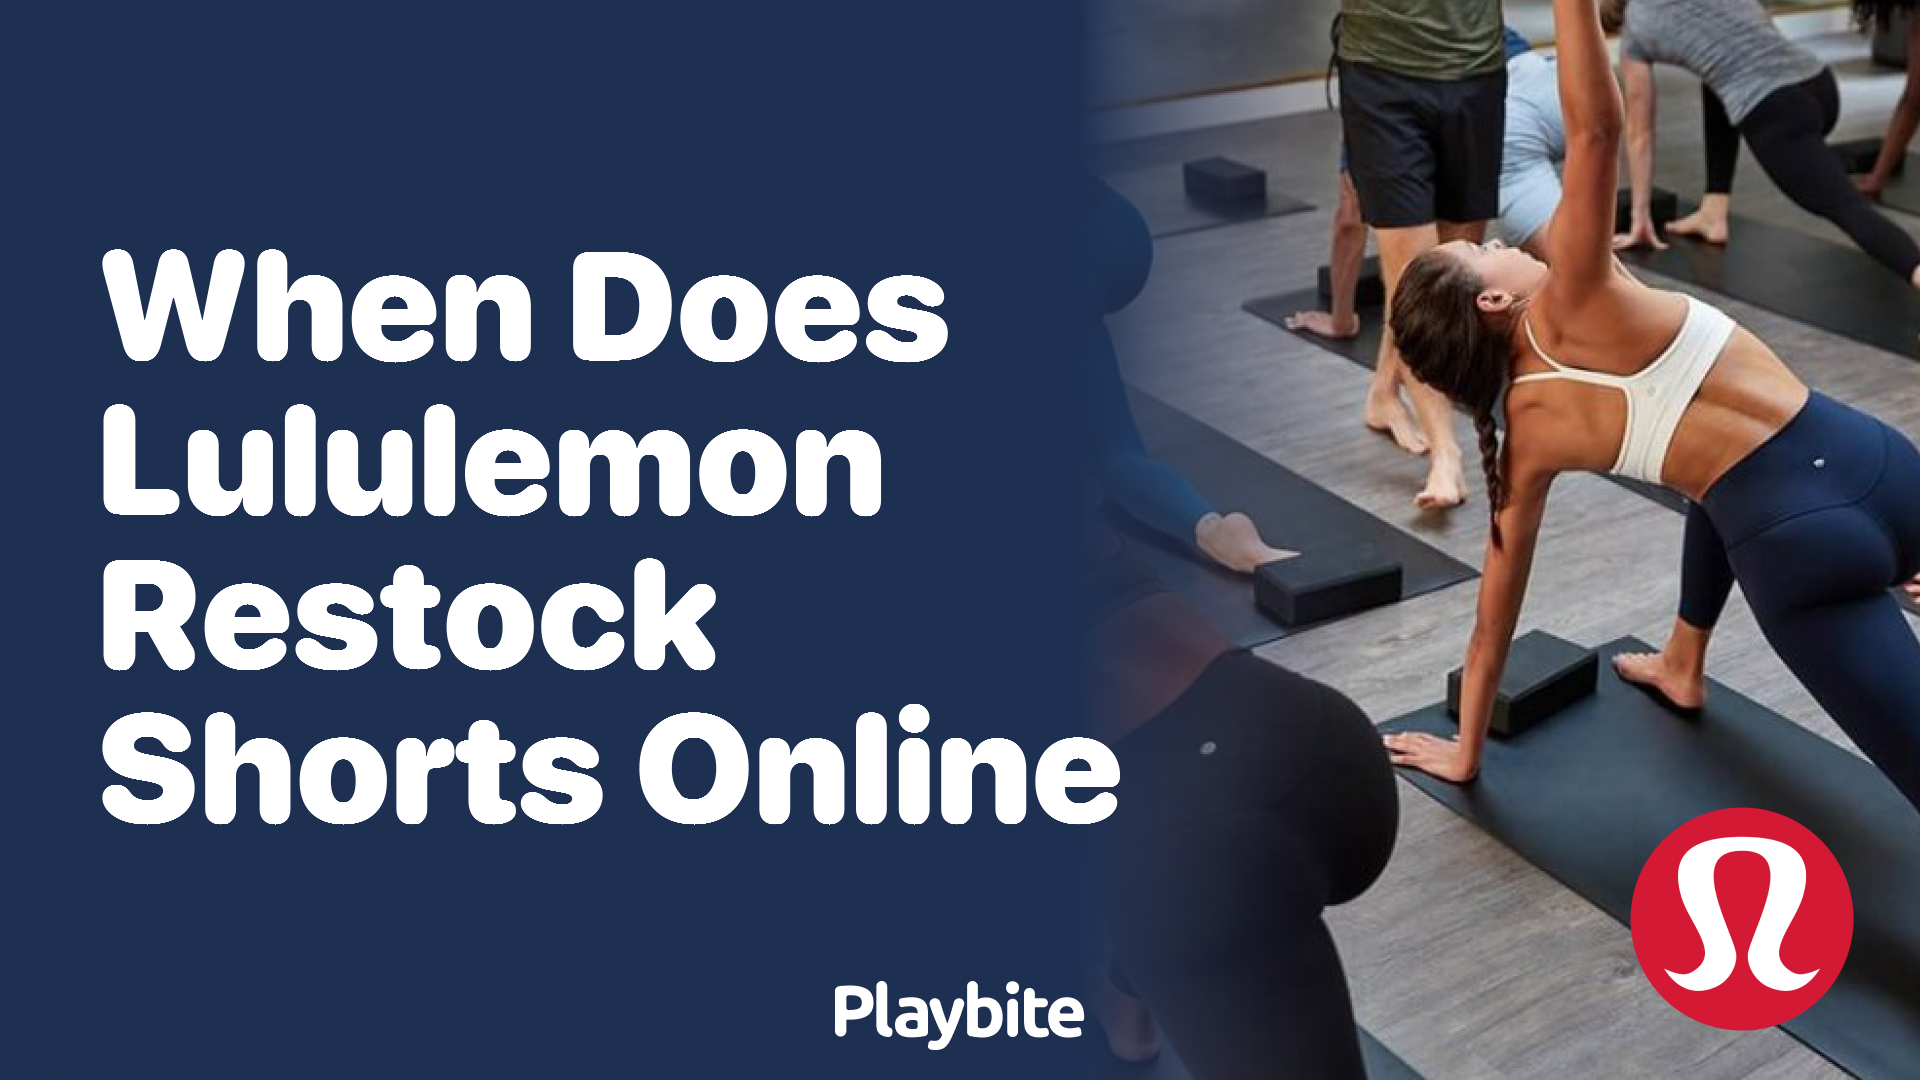 When Does Lululemon Restock 'We Made Too Much' Online? - Playbite